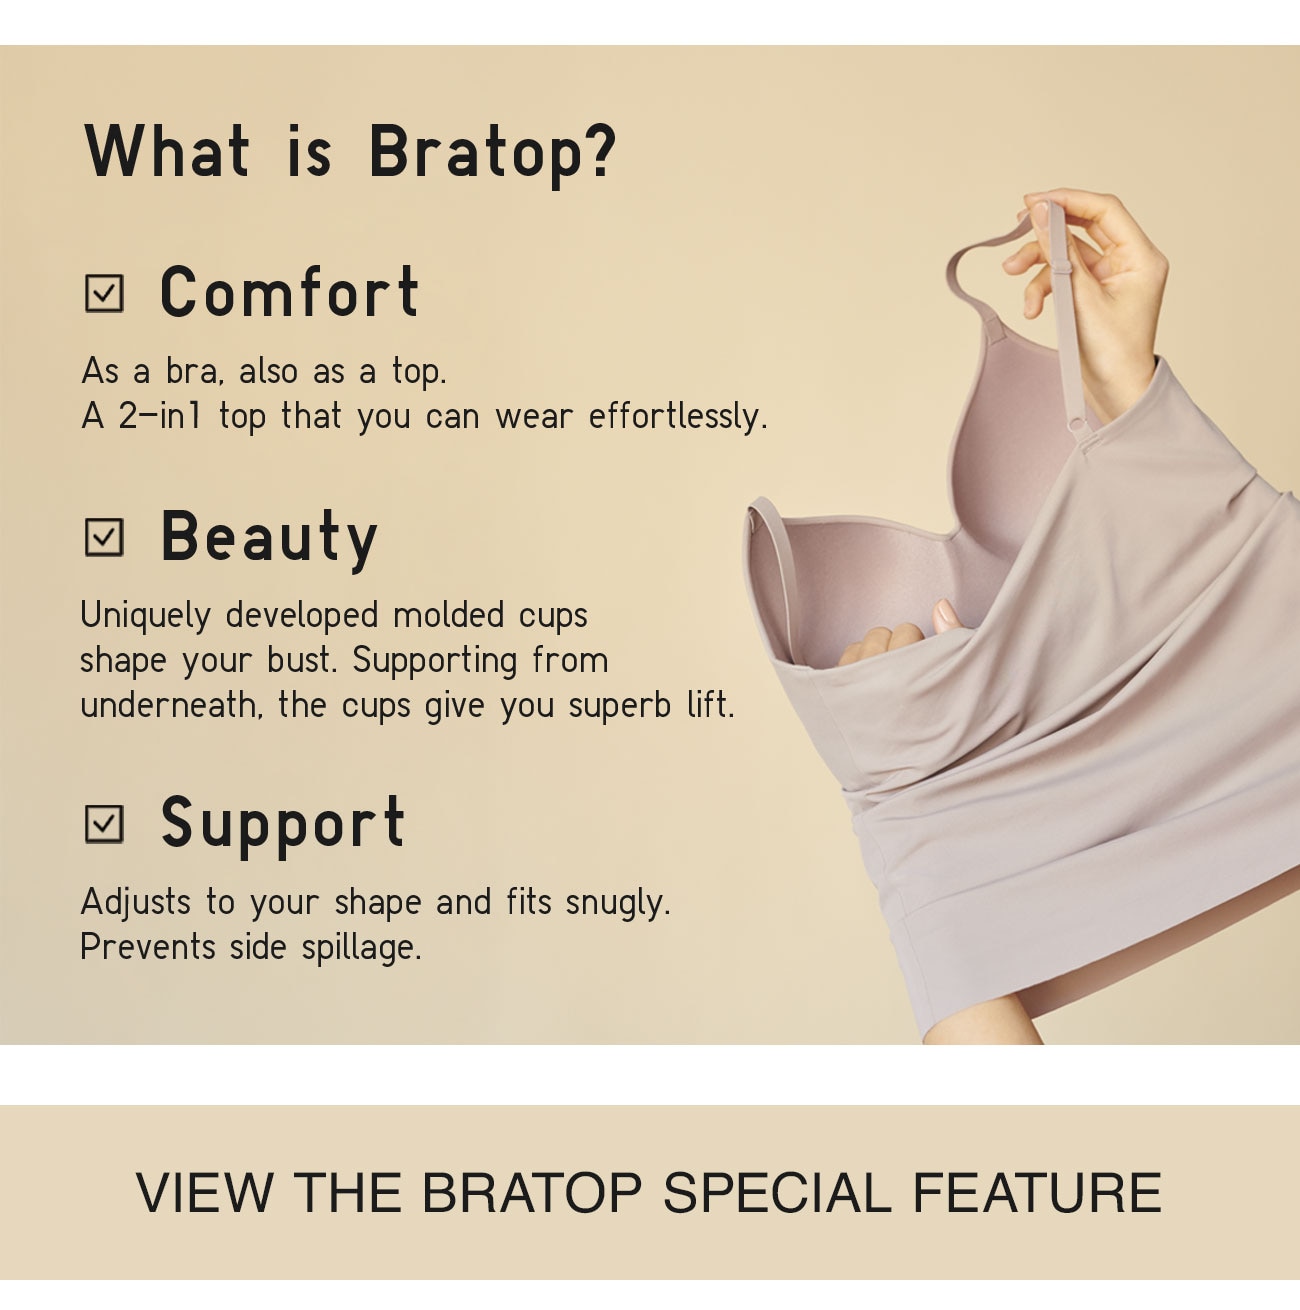 BRATOP FEATURE PAGE